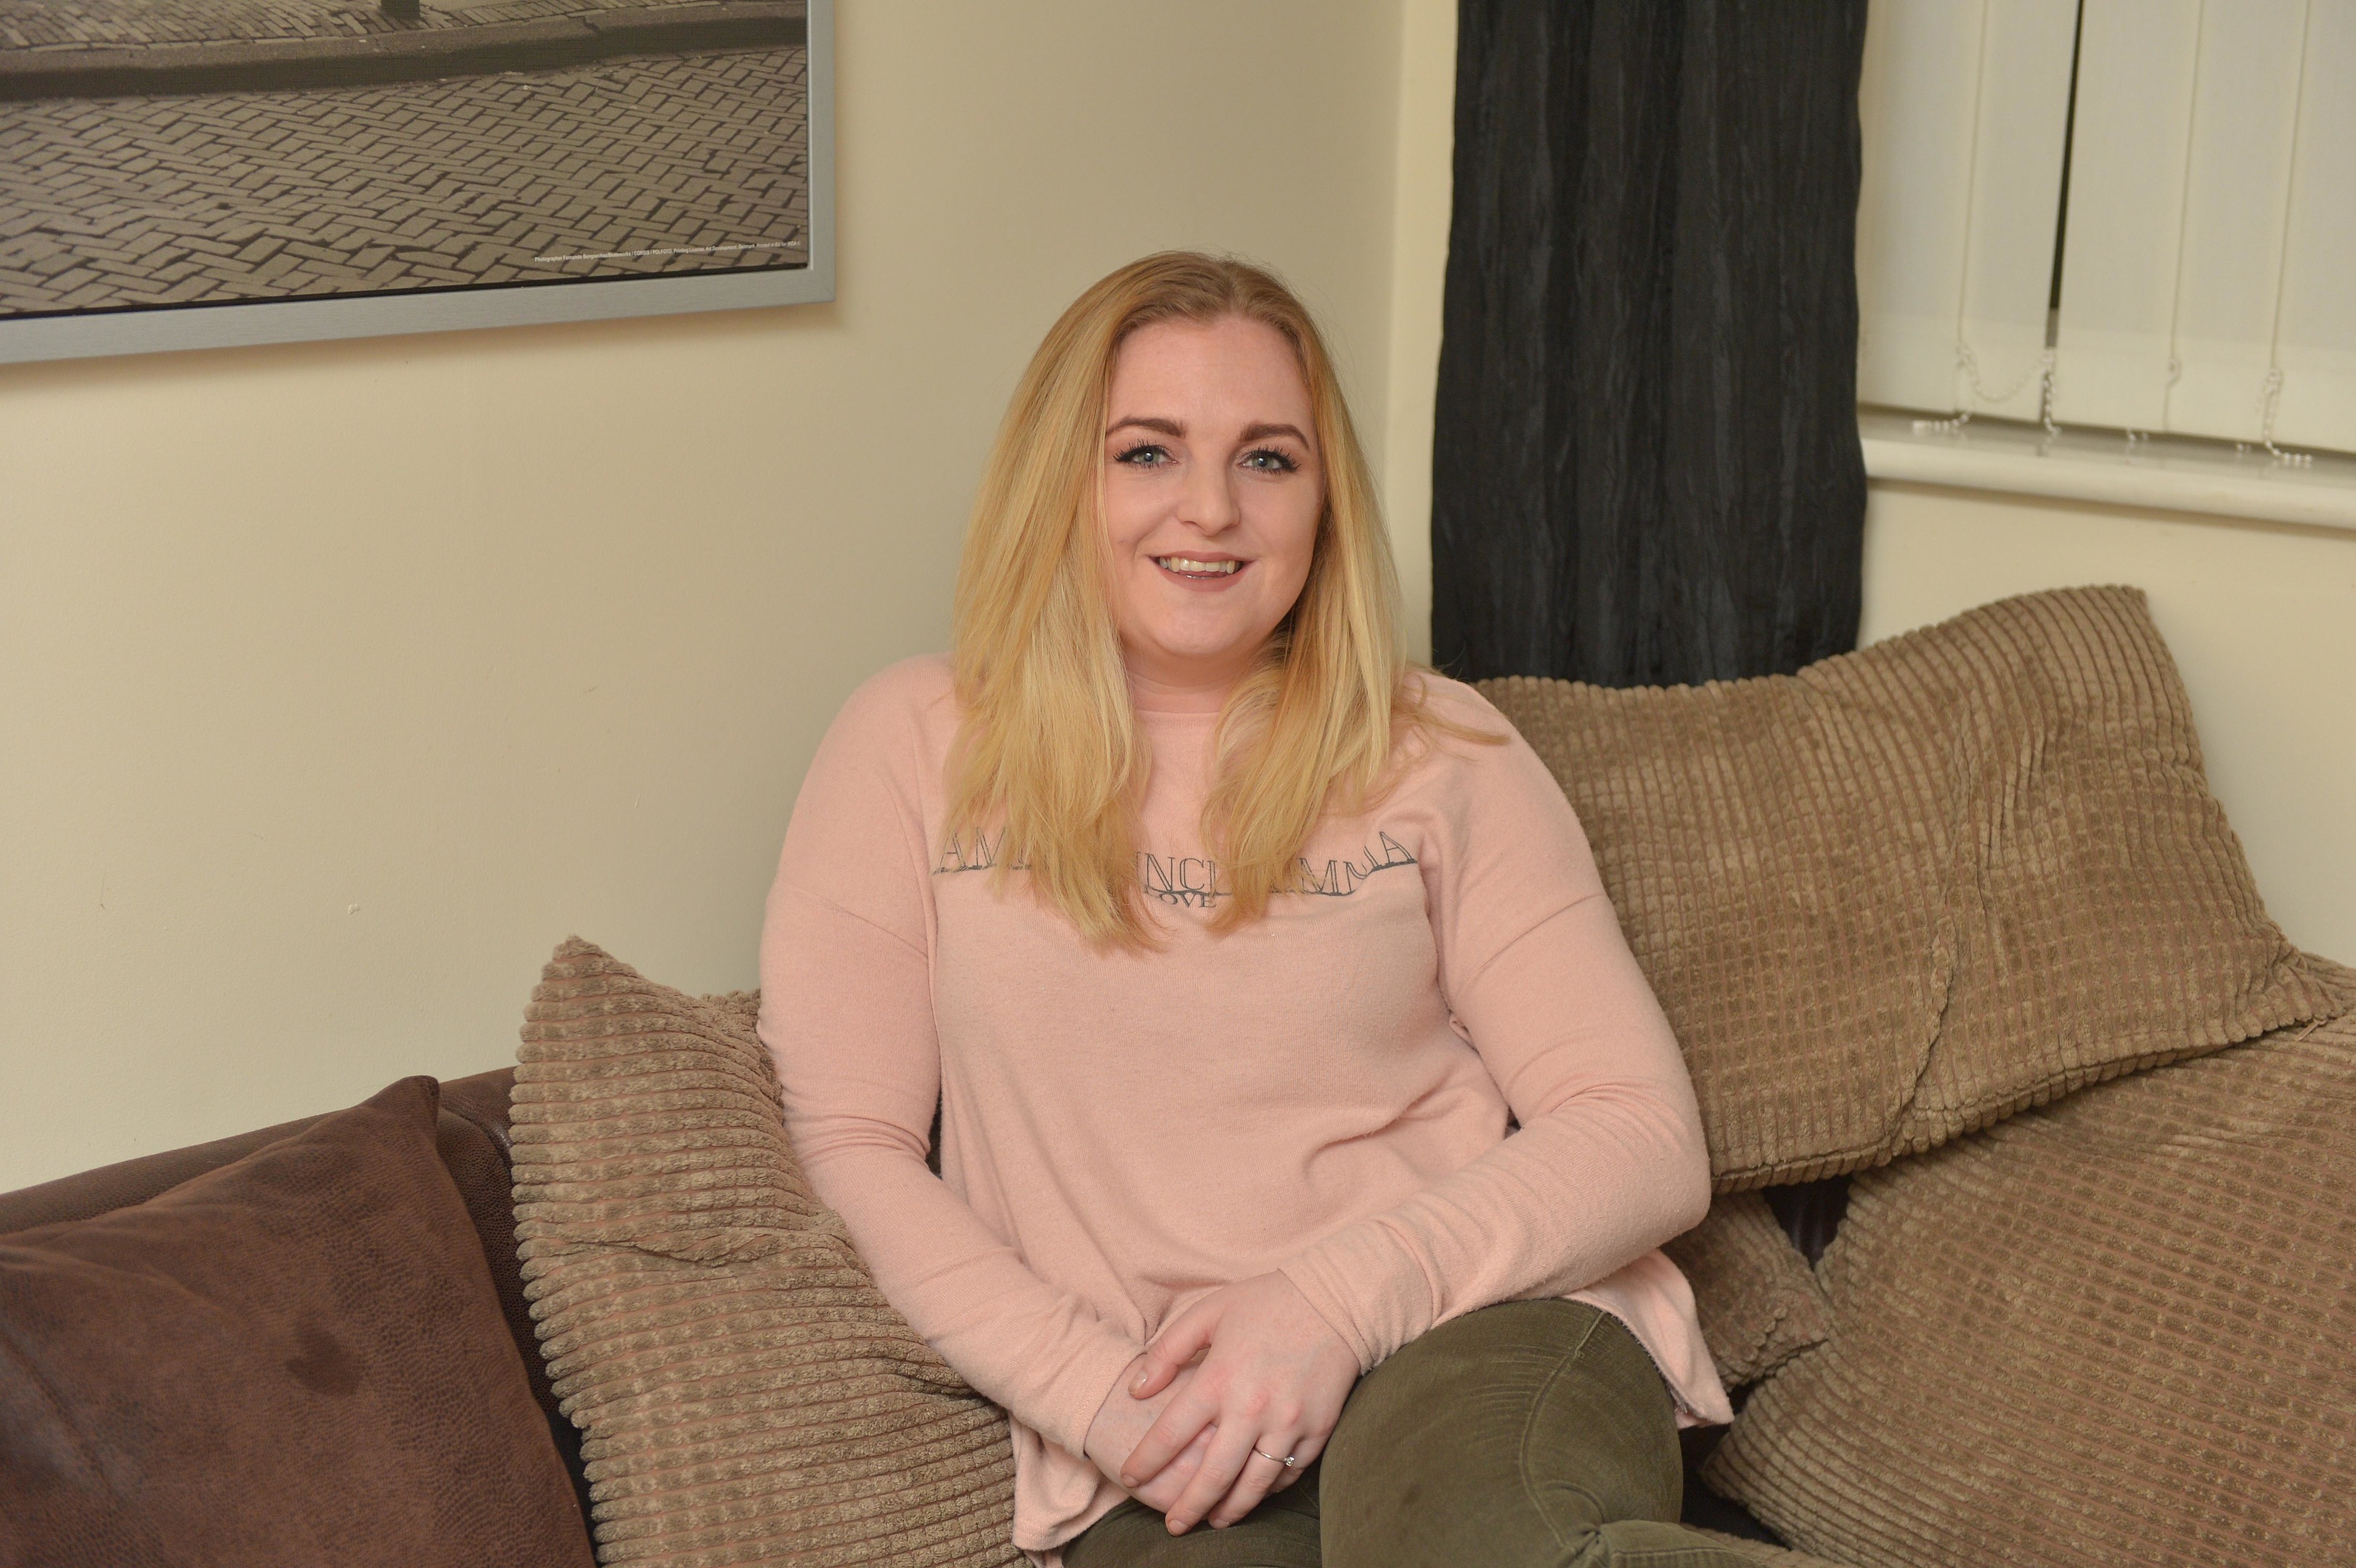 Lauren Hepple from Durham, who was helped by The Sunday Post with her trust fund problem.